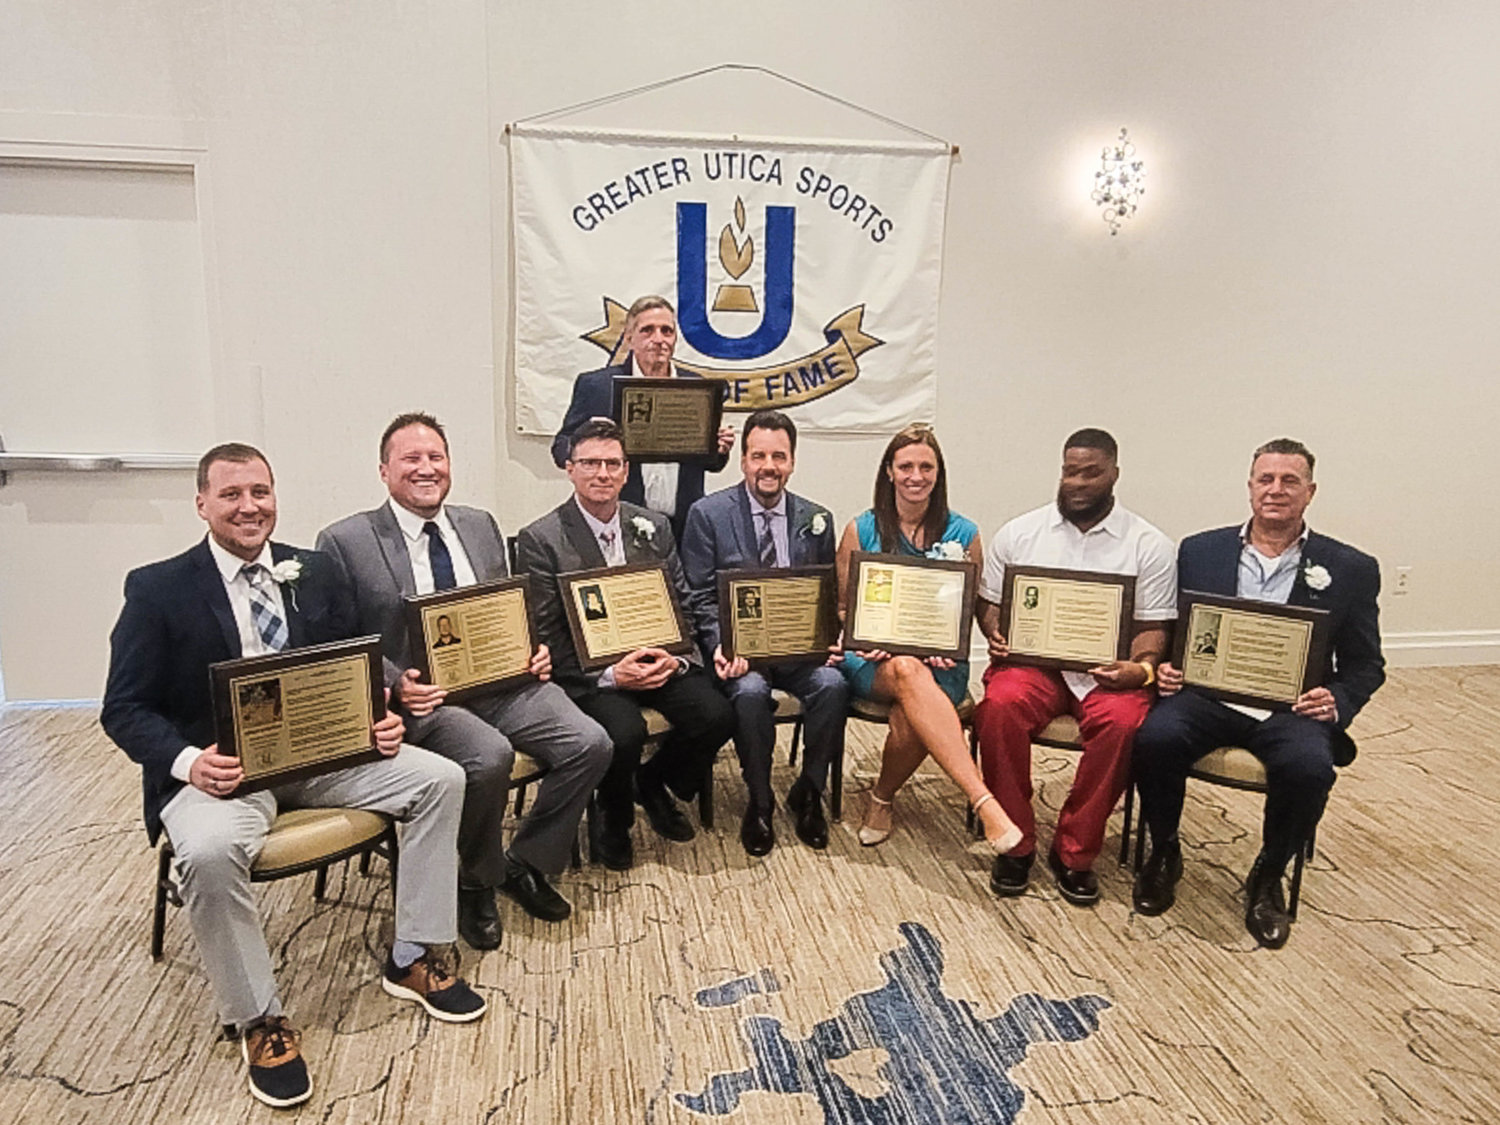 CLASS OF 2022 — The Greater Utica Sports Hall of Fame Class of 2022 was honored Sunday during the 32nd induction ceremony. Pictured from left, front row, are Sean Burton, Andrew Tarkowski, who accepted for Tom Myslinski Jr.; Todd Hobin, who accepted for his late sister Diane Hobin; Jim Jackson, Dominica (Reina) Paladino, Mizell Reed, who accepted for Dave Brown and Steve Babiarz. In back is Tom Giruzzi, who accepted for Antonio Mauro.